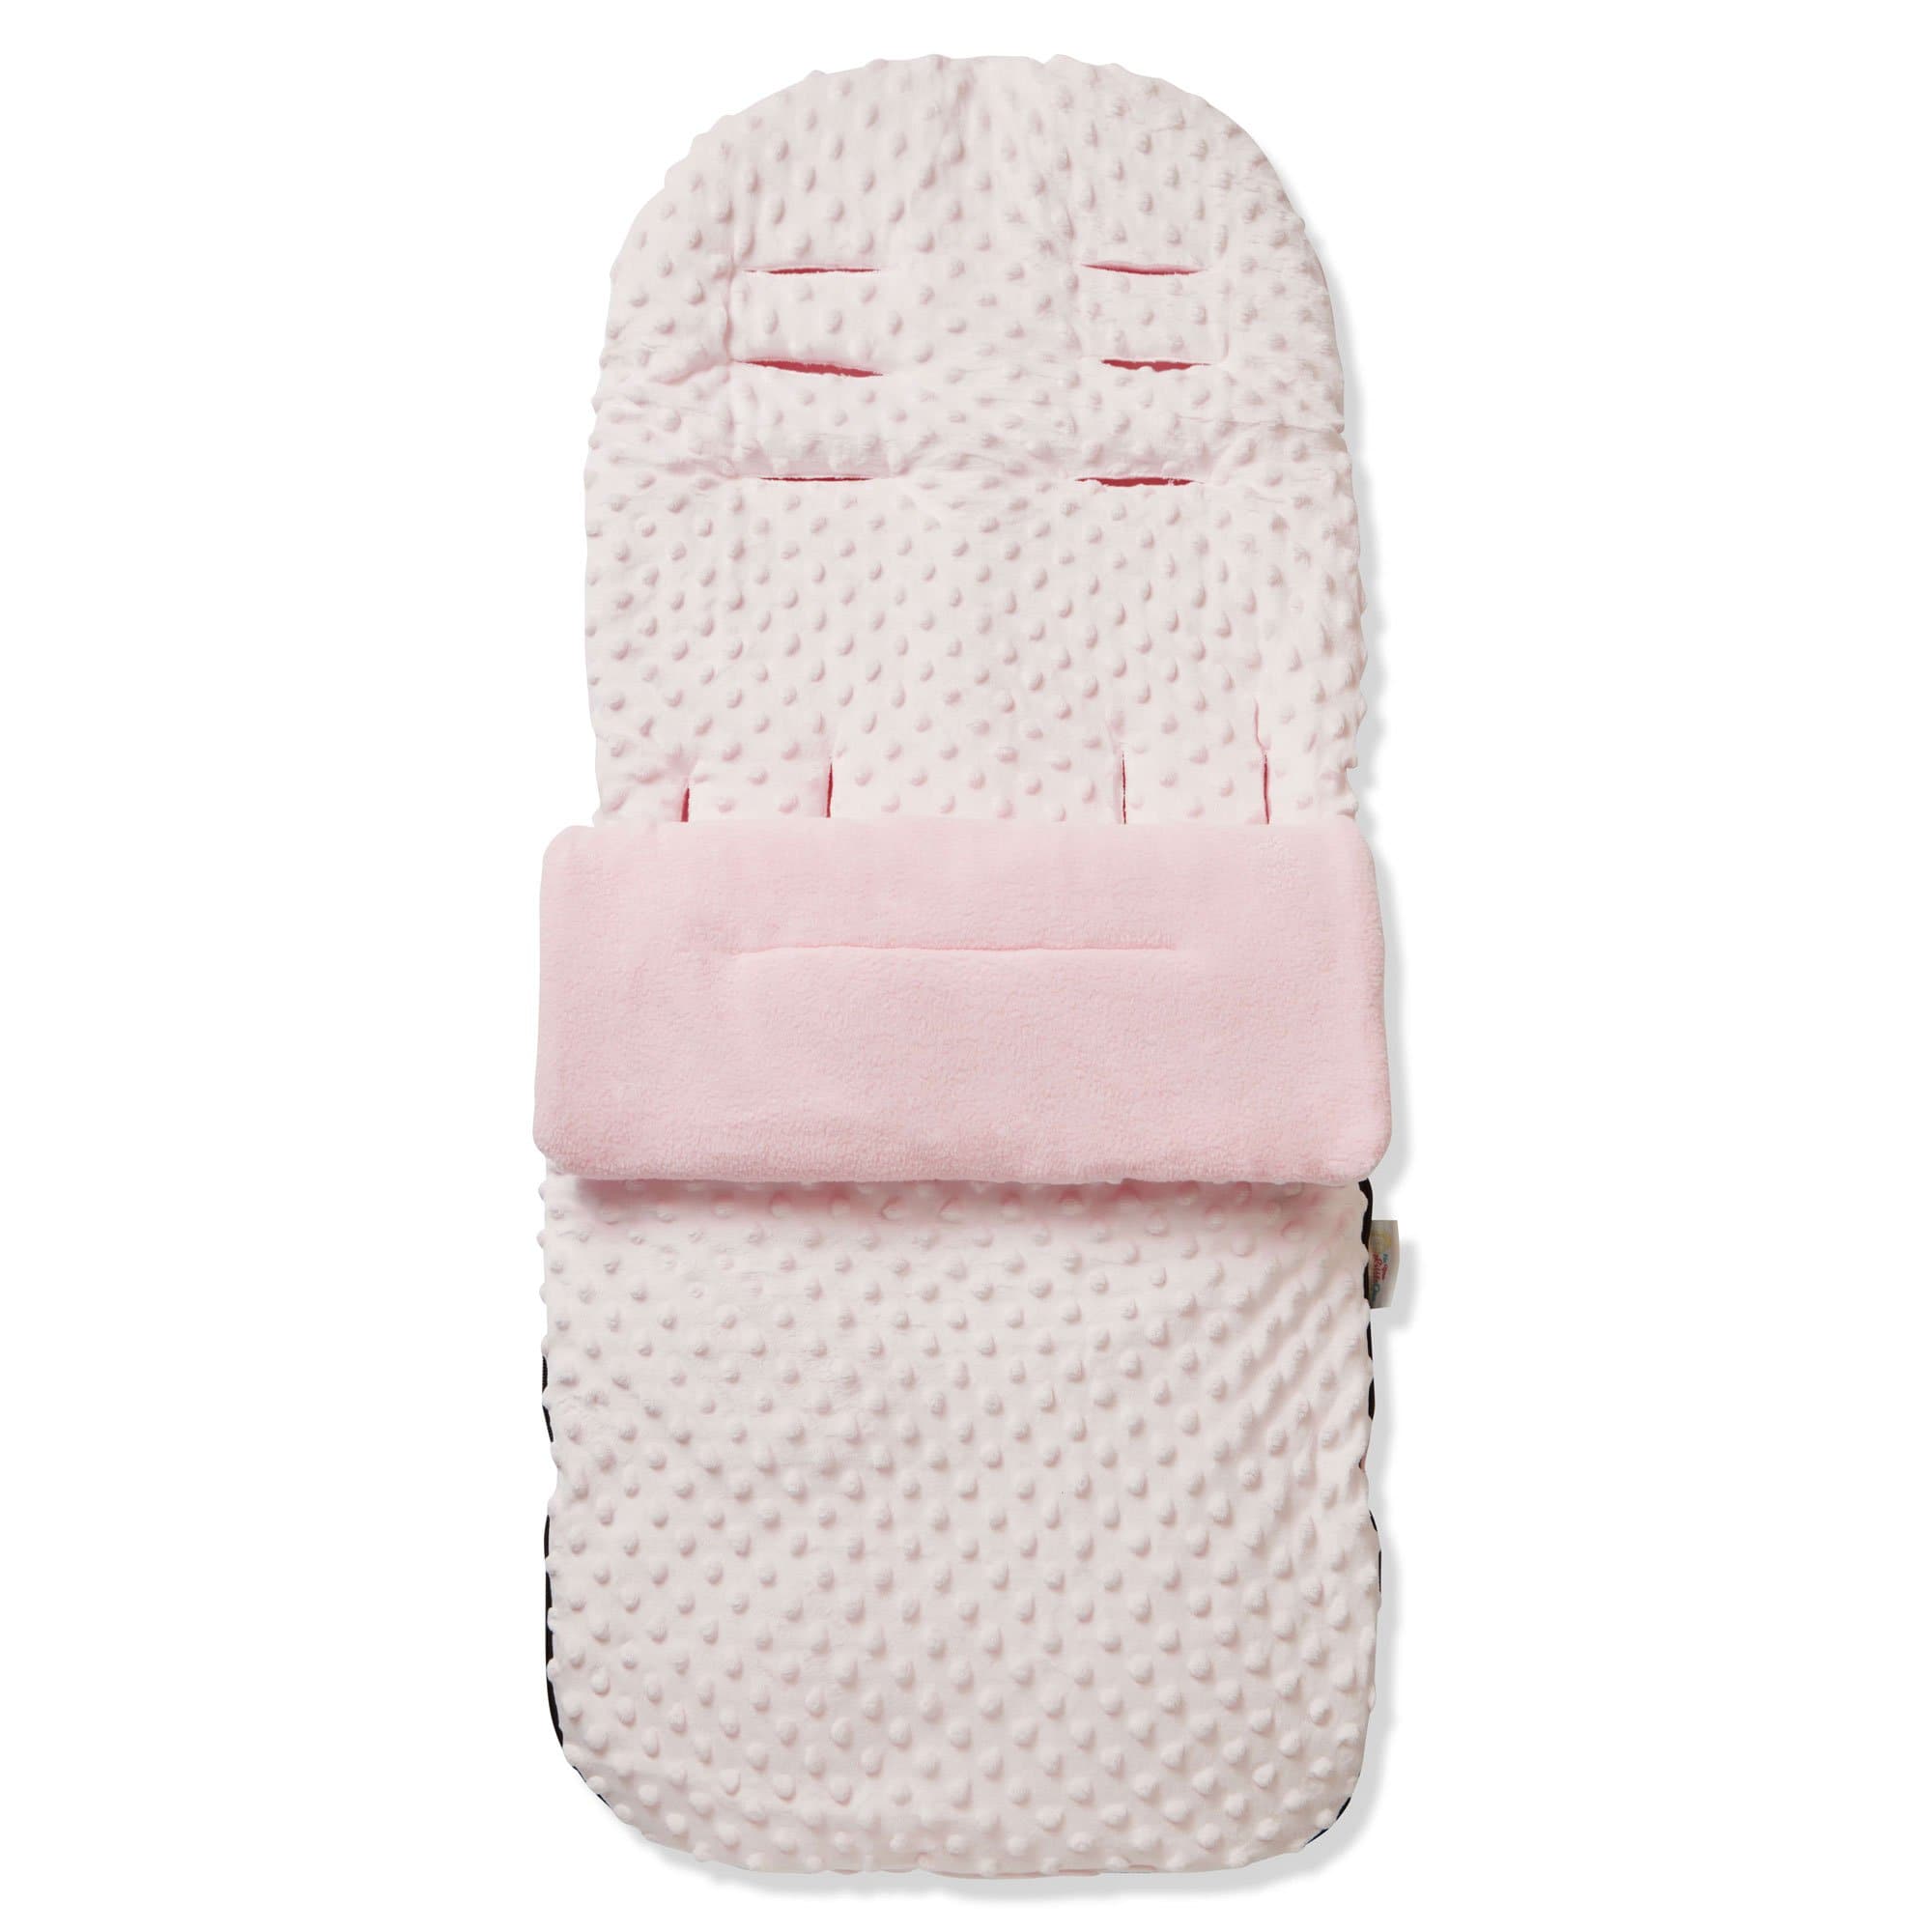 Dimple Footmuff / Cosy Toes Compatible with Orbit Baby - Pink / Fits All Models | For Your Little One